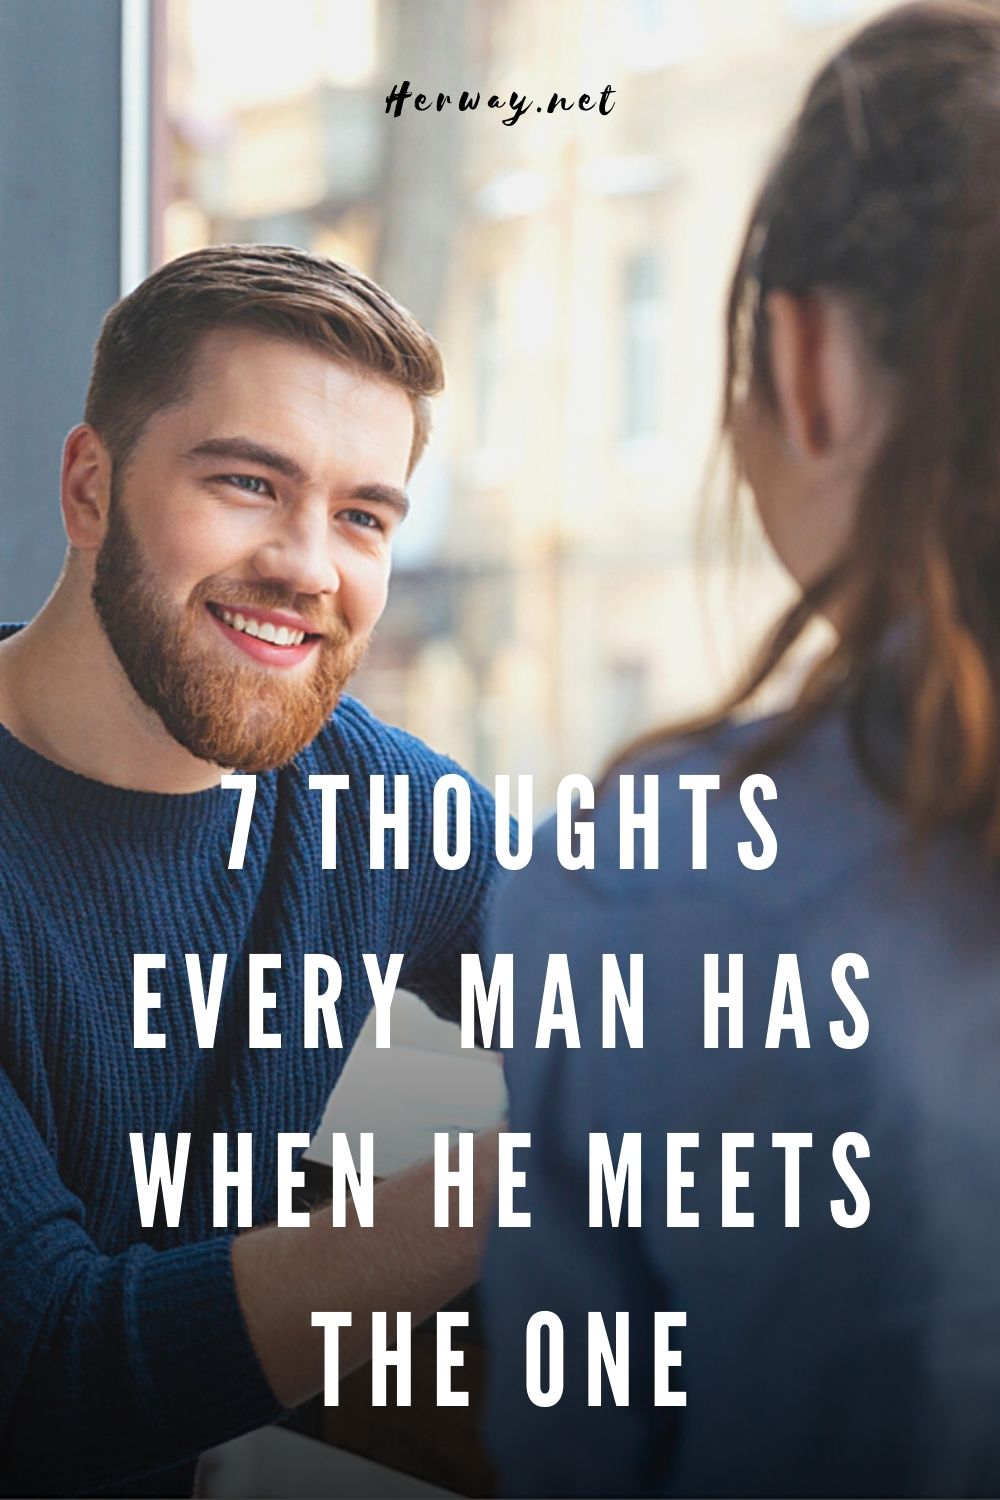 7 Thoughts Every Man Has When He Meets The One